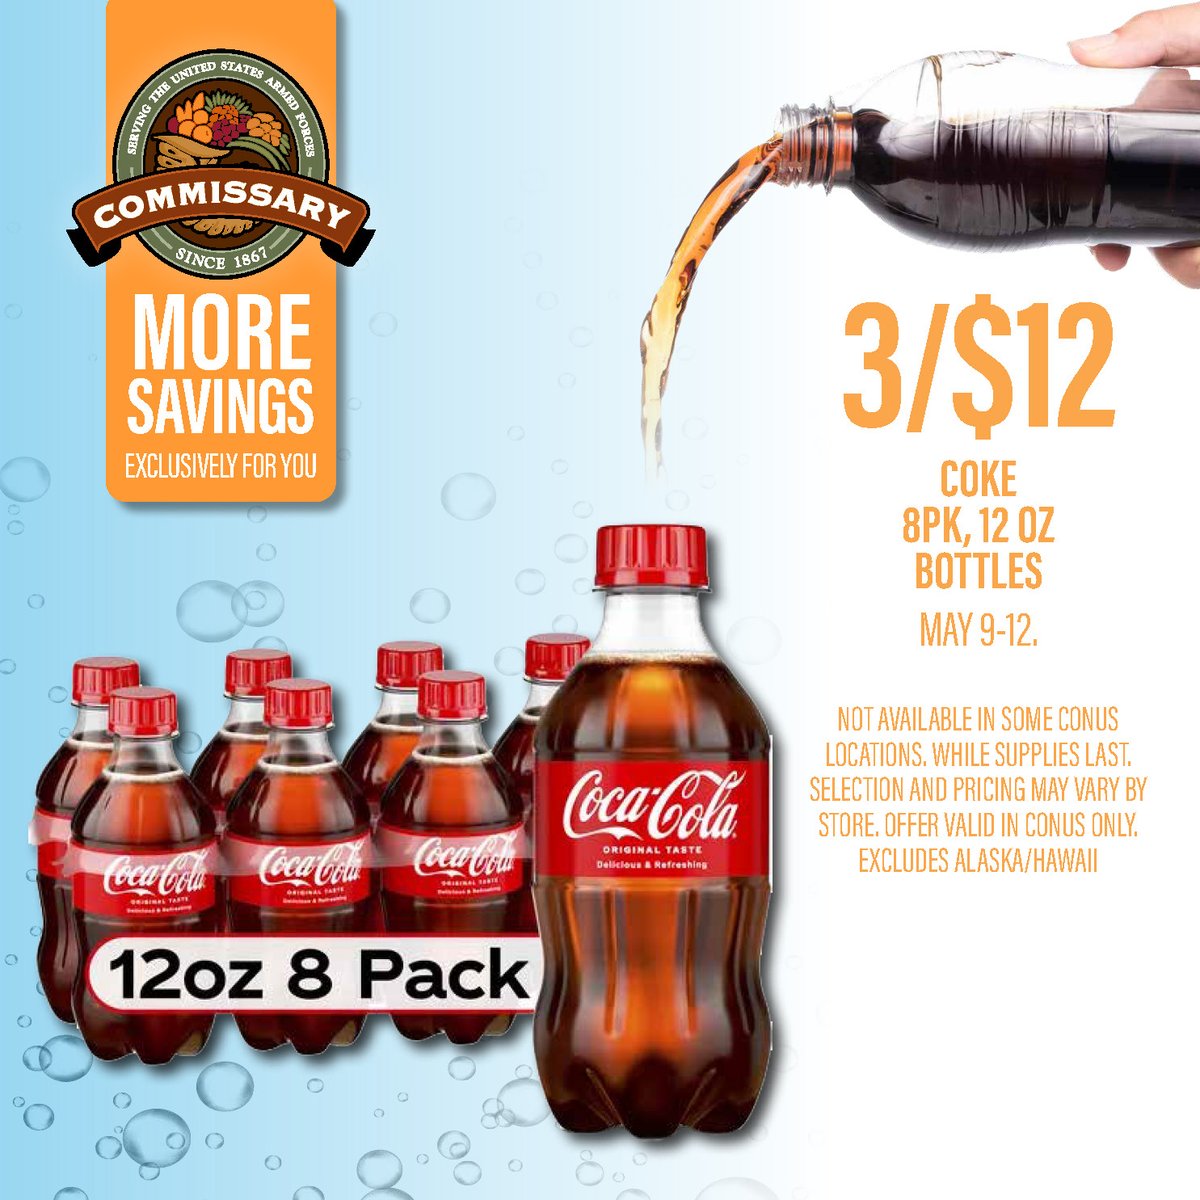 Thirsty for savings? Quench your cravings at the Commissary from May 9th to 12th with our refreshing soda sale! Stock up on your favorite fizzy drinks and beat the heat without breaking the bank. #SodaSale #CommissarySavings